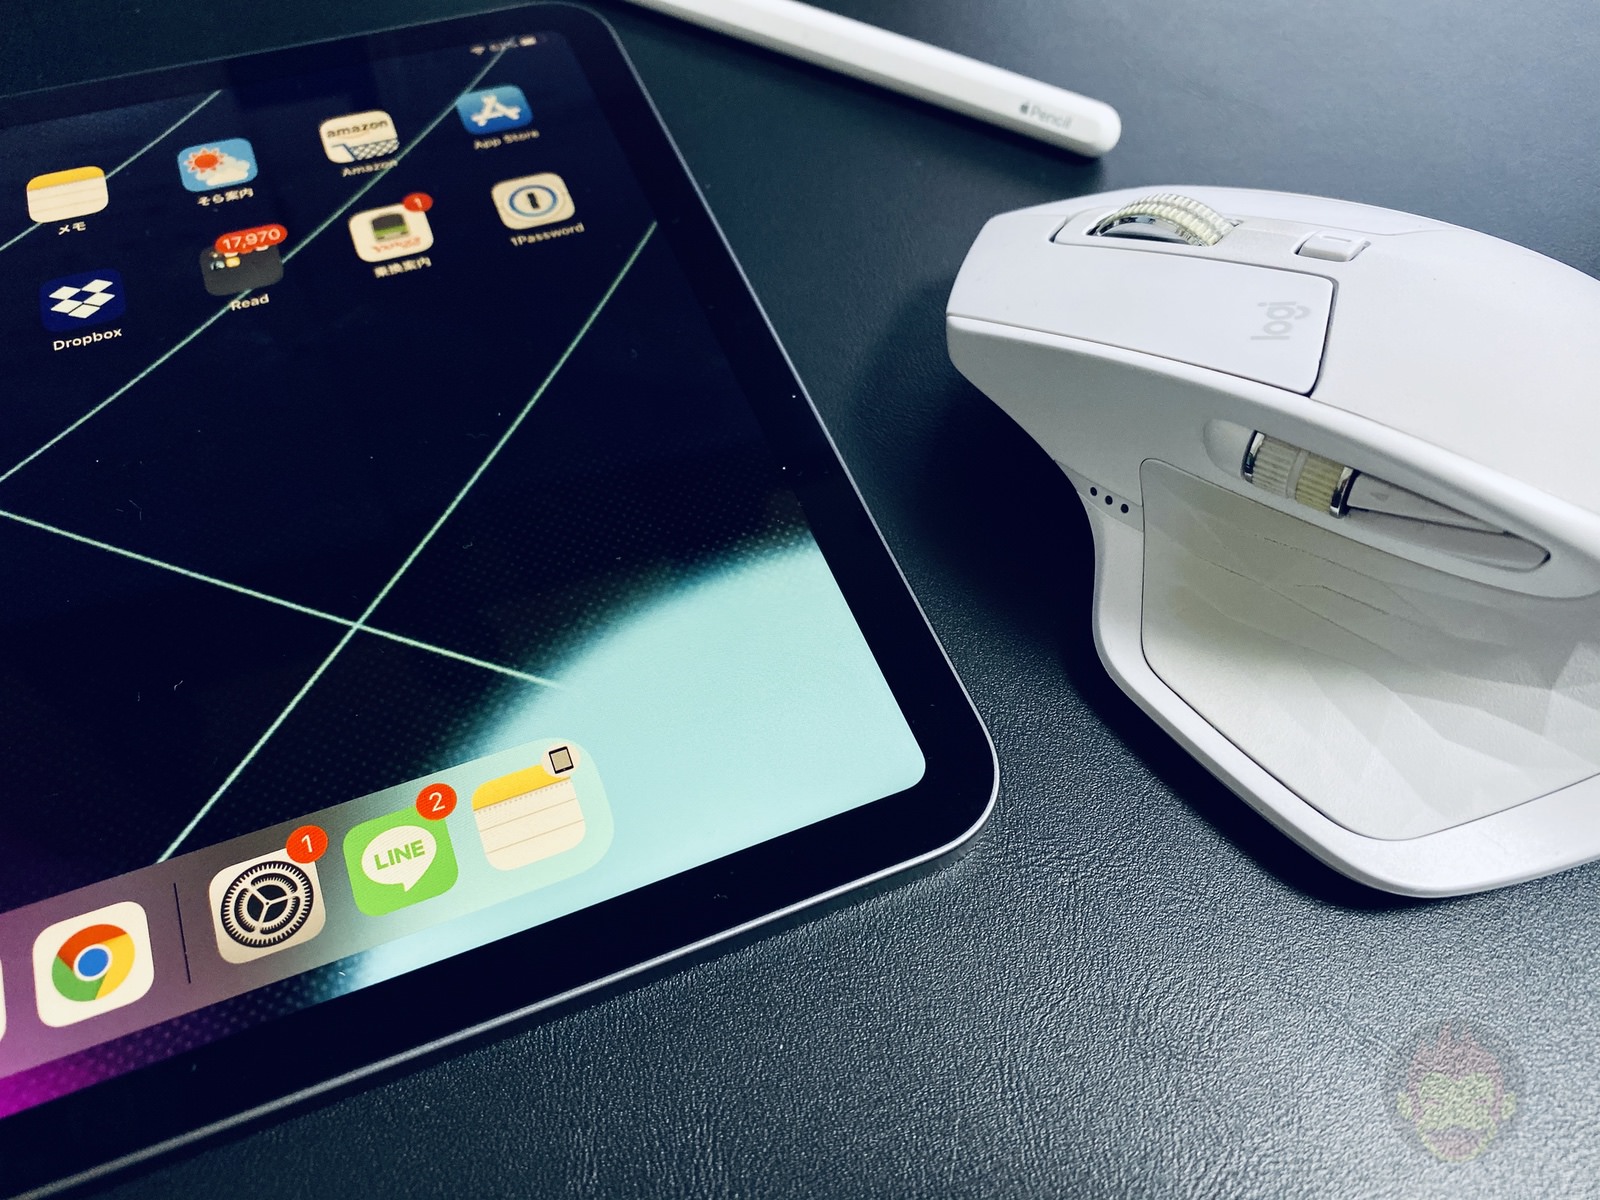 Mouse-Support-on-iPadOS13-01.jpg